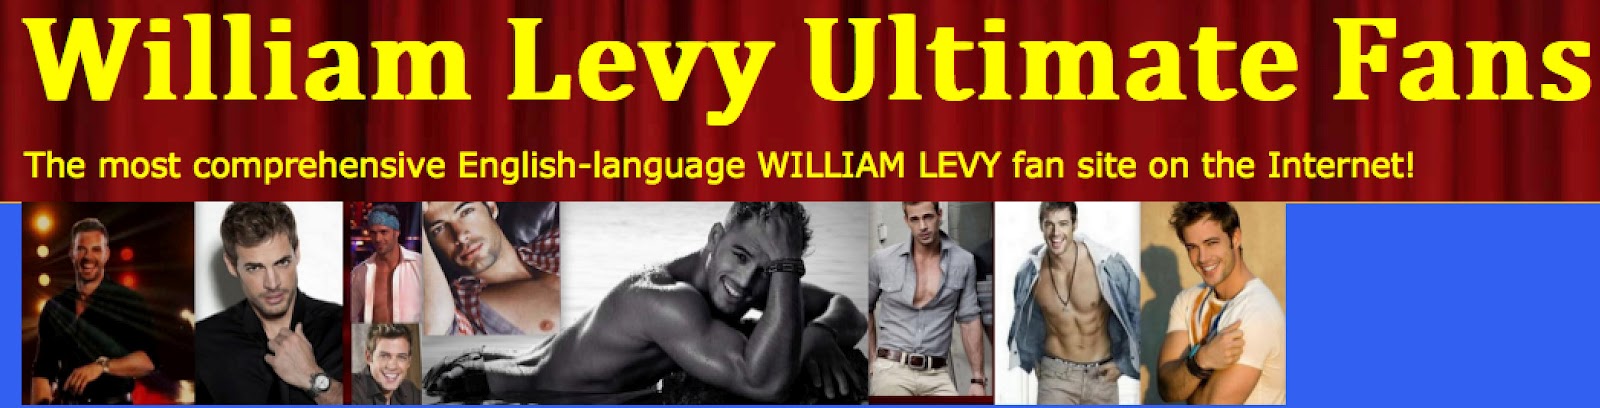 William Levy Ultimate Fans William Levy Ultimate Fans Reaches 60 000